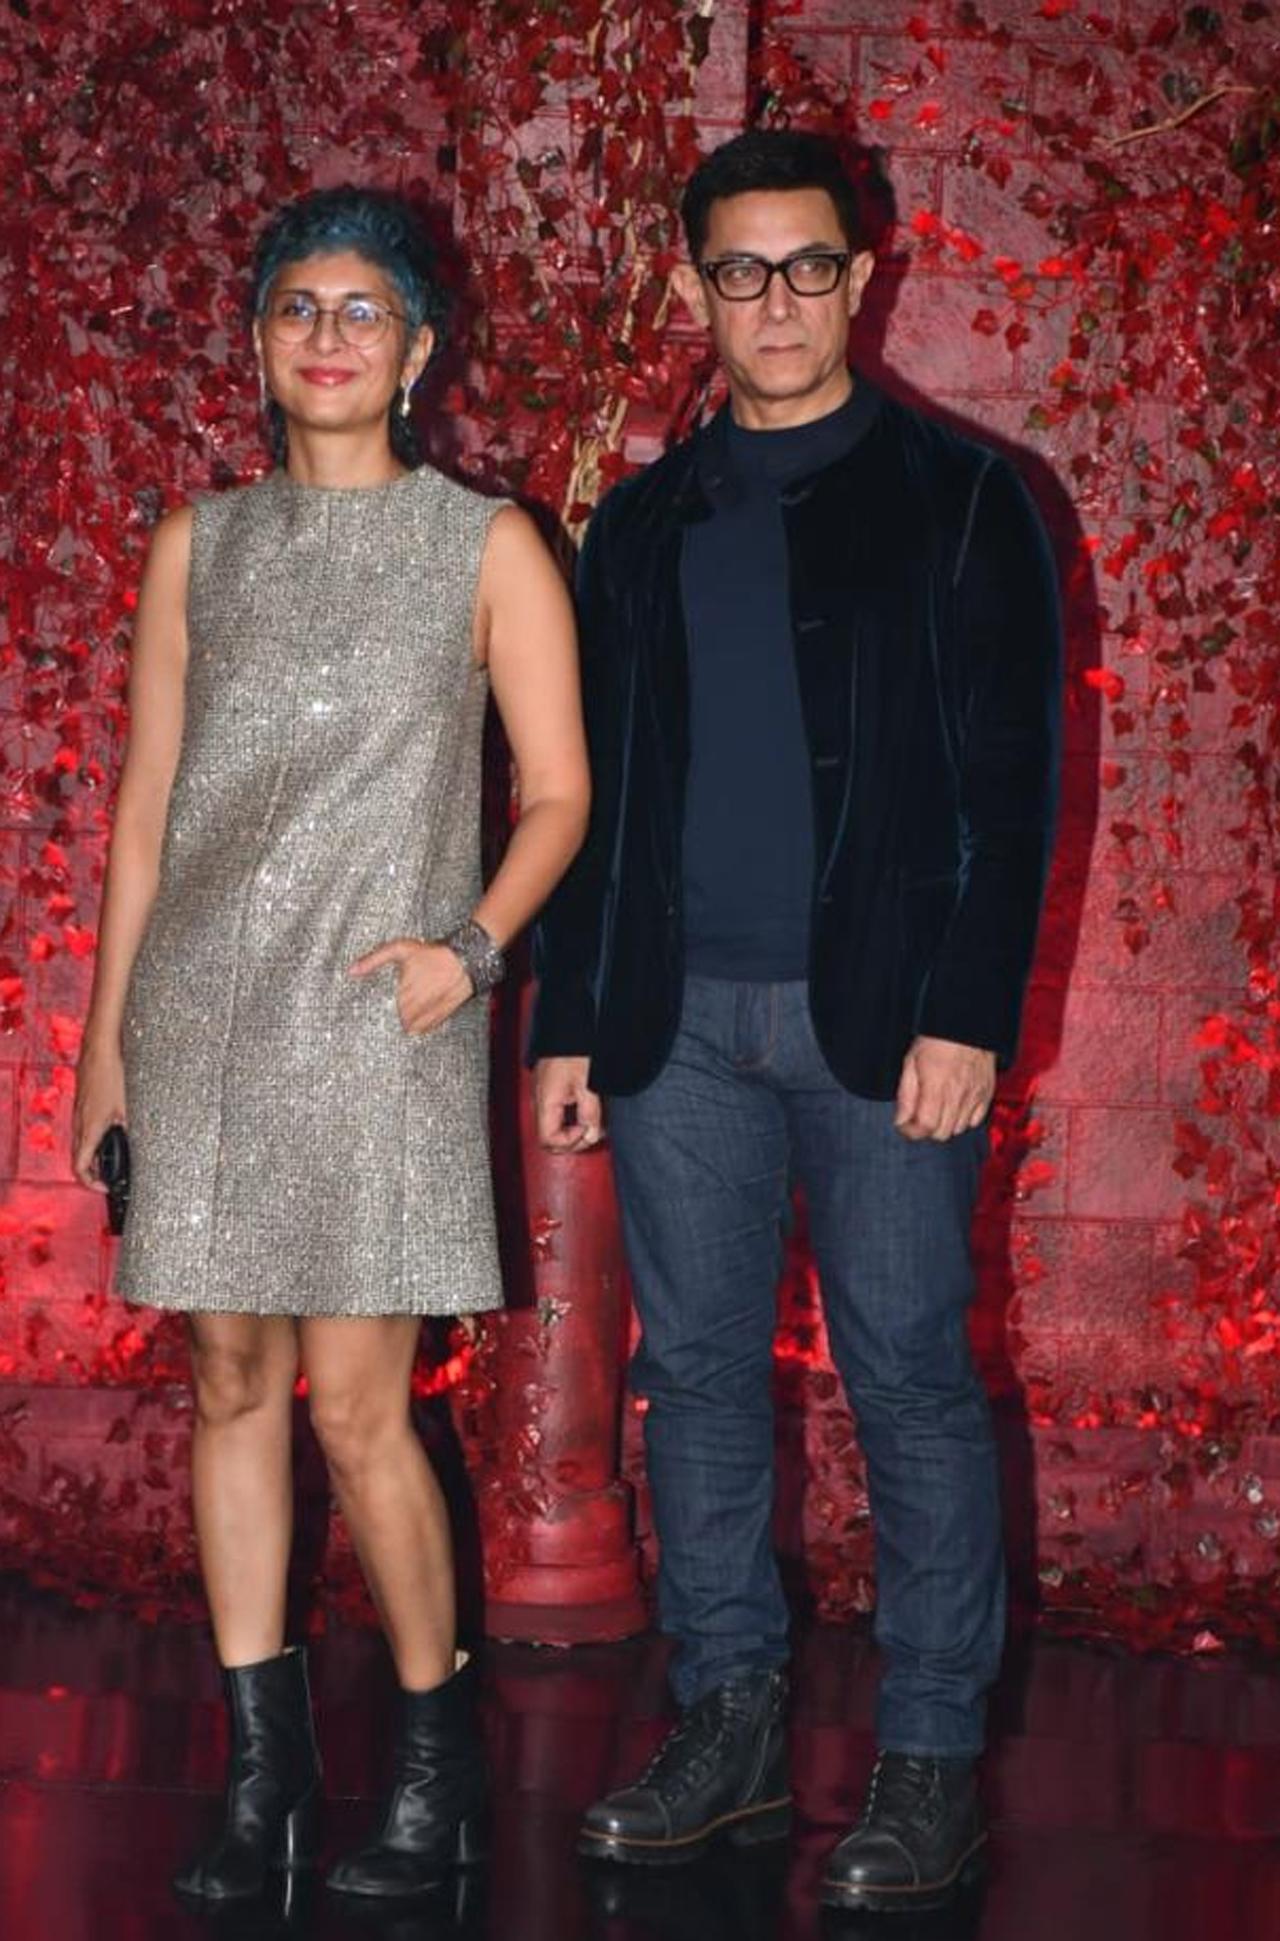 Aamir Khan and Kiran Rao also made a rare appearance together. They have also worked together on Laal Singh Chaddha. The couple announced its separation last year but stated that they continue to have mutual respect and will work together for their initiative Paani Foundation.